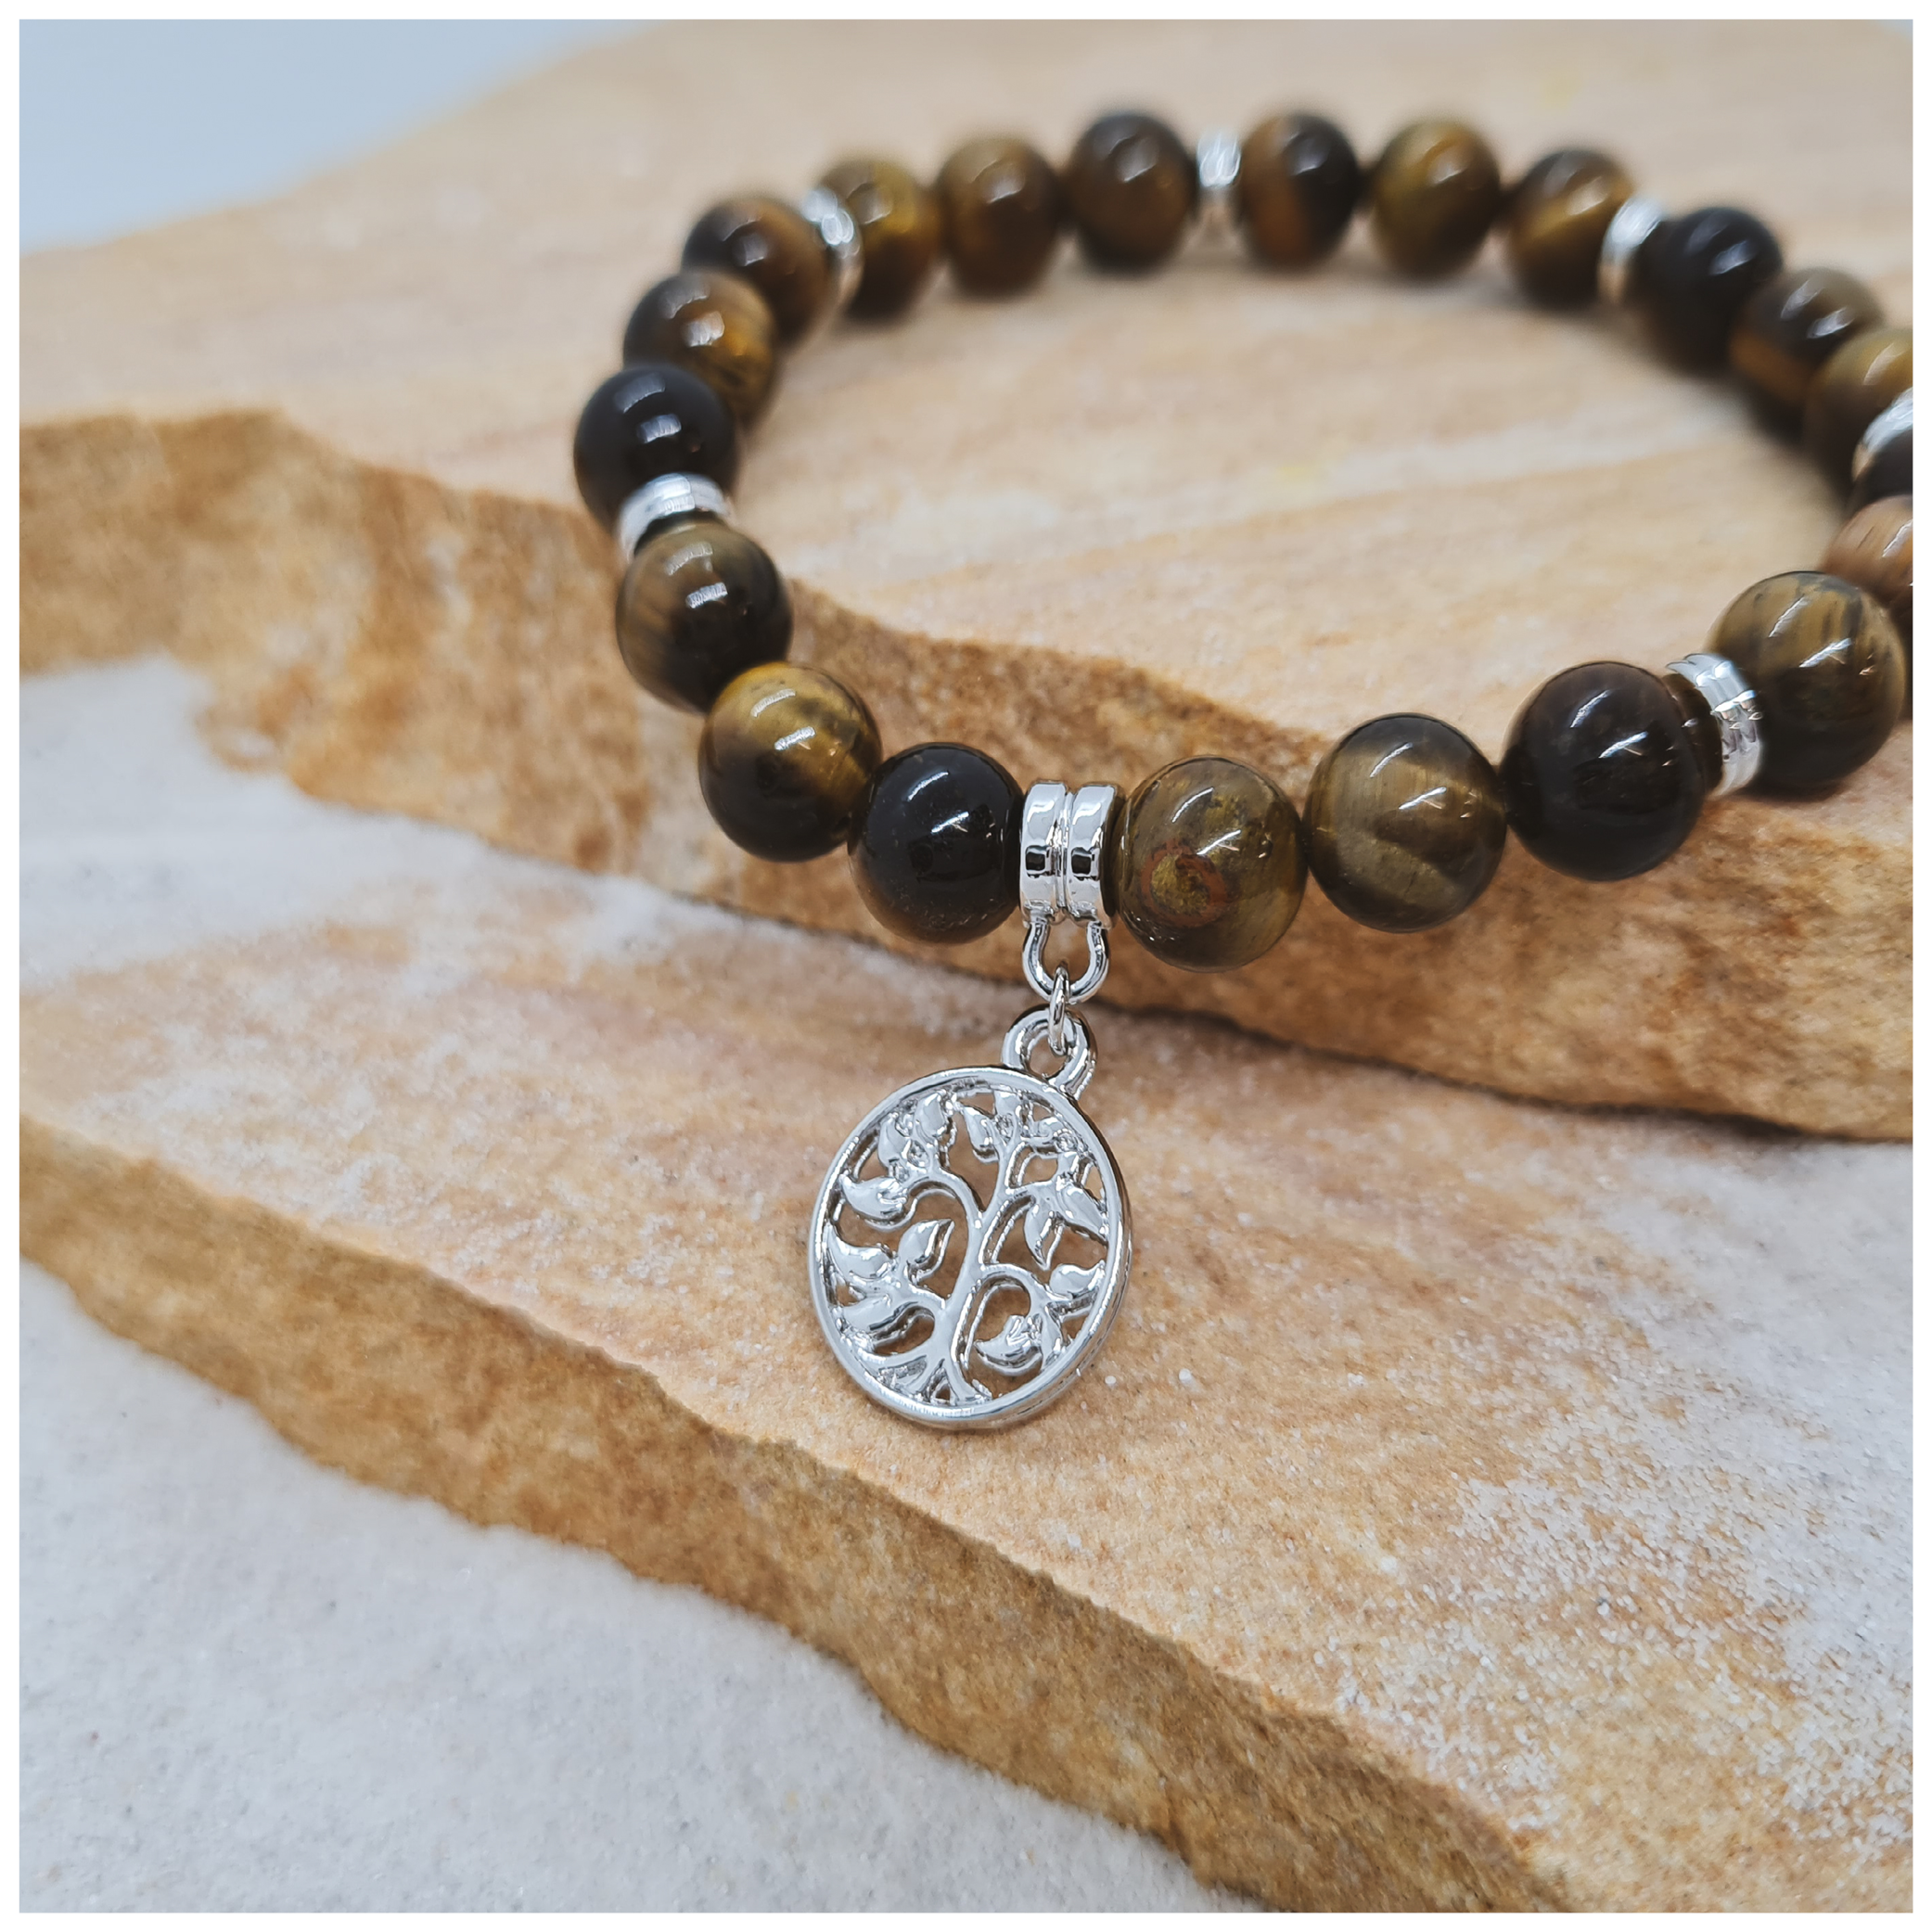 Gold Tiger's Eye 6mm crystal bead bracelet twin set with silver tree of life charm